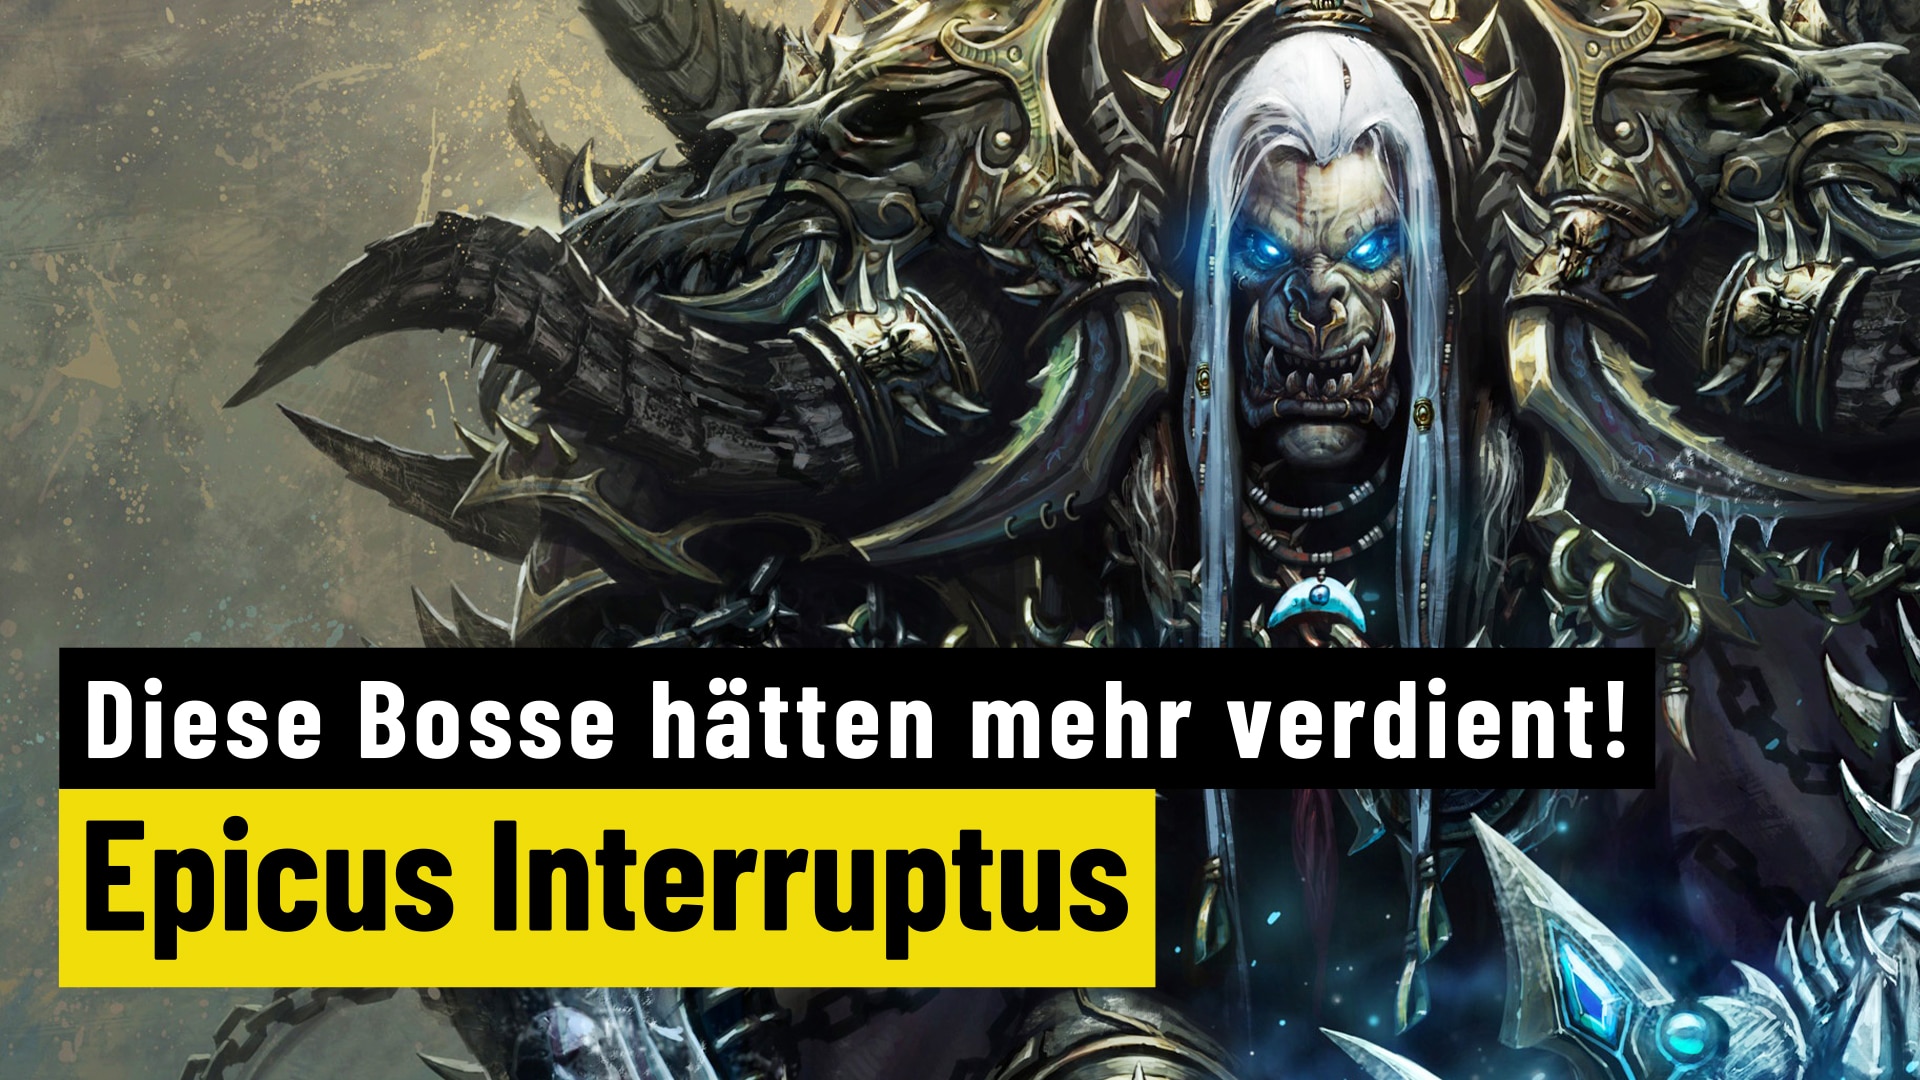 screwed up 10 times!  |  These WoW bosses deserved more